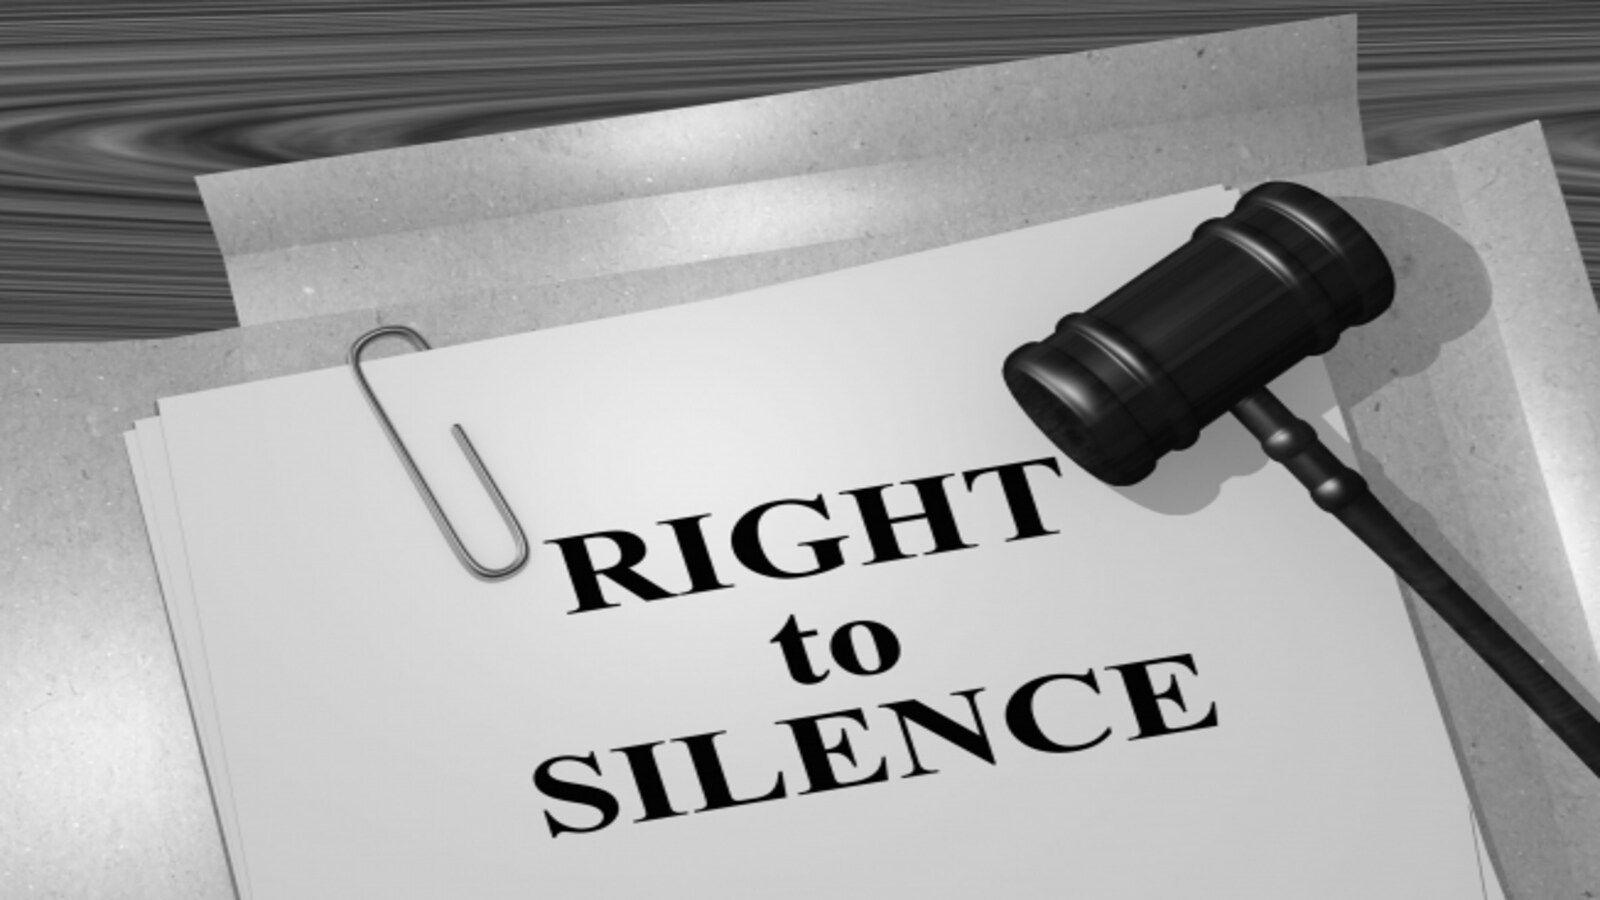 The right to remain silent: A guide to being a civil witness under ...